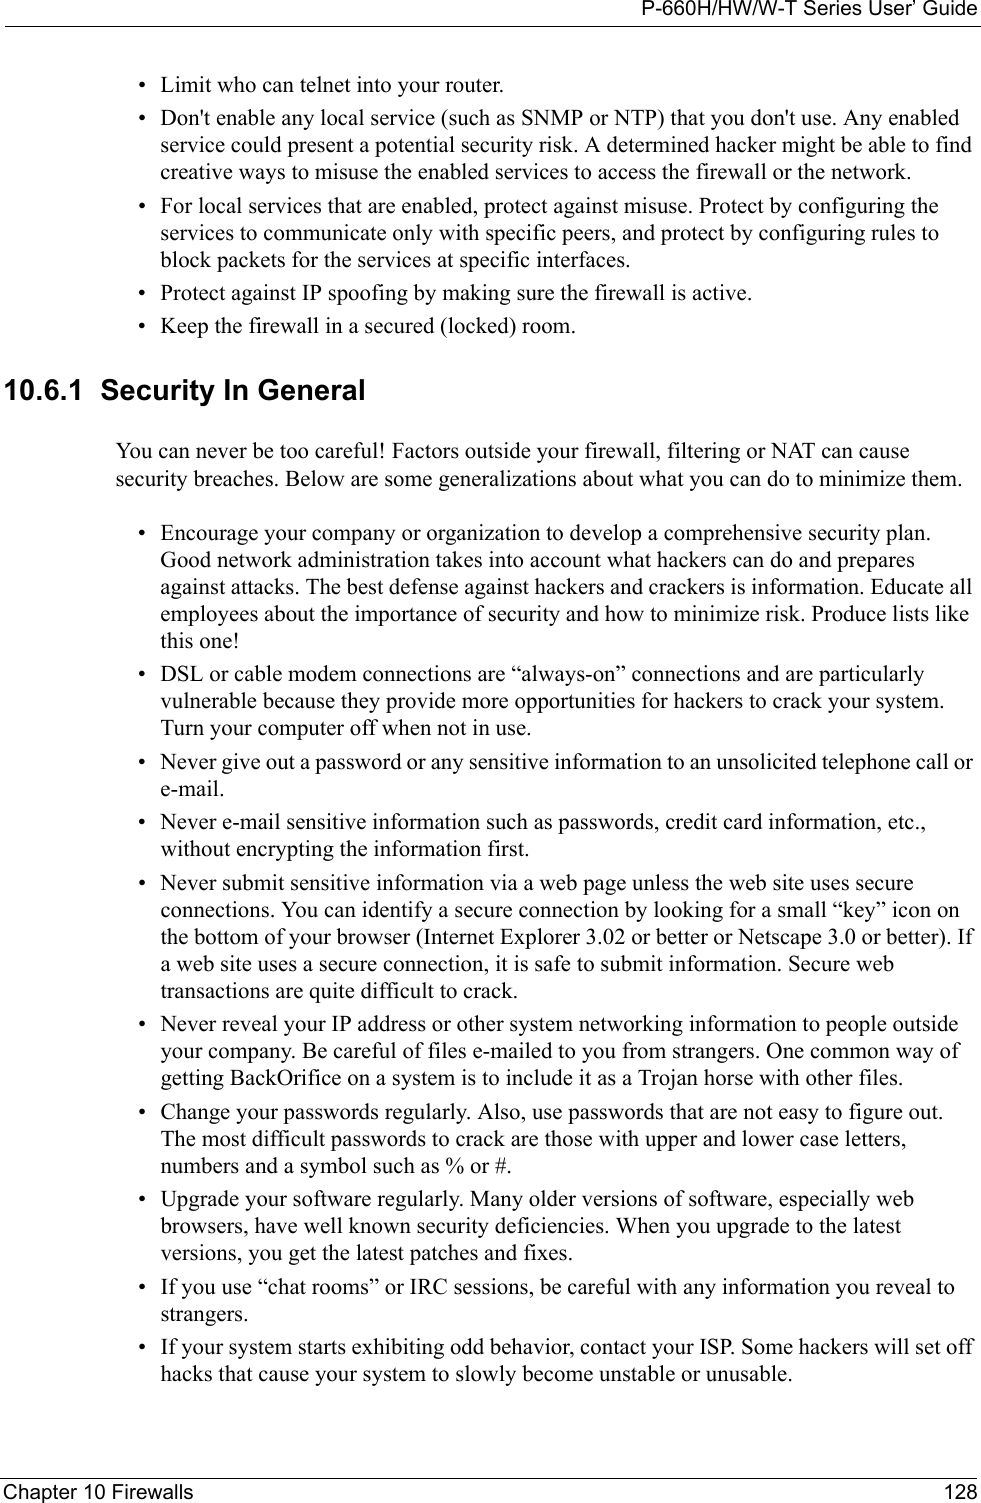 P-660H/HW/W-T Series User’ GuideChapter 10 Firewalls 128• Limit who can telnet into your router. • Don&apos;t enable any local service (such as SNMP or NTP) that you don&apos;t use. Any enabled service could present a potential security risk. A determined hacker might be able to find creative ways to misuse the enabled services to access the firewall or the network. • For local services that are enabled, protect against misuse. Protect by configuring the services to communicate only with specific peers, and protect by configuring rules to block packets for the services at specific interfaces. • Protect against IP spoofing by making sure the firewall is active. • Keep the firewall in a secured (locked) room. 10.6.1  Security In GeneralYou can never be too careful! Factors outside your firewall, filtering or NAT can cause security breaches. Below are some generalizations about what you can do to minimize them.• Encourage your company or organization to develop a comprehensive security plan. Good network administration takes into account what hackers can do and prepares against attacks. The best defense against hackers and crackers is information. Educate all employees about the importance of security and how to minimize risk. Produce lists like this one!• DSL or cable modem connections are “always-on” connections and are particularly vulnerable because they provide more opportunities for hackers to crack your system. Turn your computer off when not in use. • Never give out a password or any sensitive information to an unsolicited telephone call or e-mail.• Never e-mail sensitive information such as passwords, credit card information, etc., without encrypting the information first.• Never submit sensitive information via a web page unless the web site uses secure connections. You can identify a secure connection by looking for a small “key” icon on the bottom of your browser (Internet Explorer 3.02 or better or Netscape 3.0 or better). If a web site uses a secure connection, it is safe to submit information. Secure web transactions are quite difficult to crack.• Never reveal your IP address or other system networking information to people outside your company. Be careful of files e-mailed to you from strangers. One common way of getting BackOrifice on a system is to include it as a Trojan horse with other files.• Change your passwords regularly. Also, use passwords that are not easy to figure out. The most difficult passwords to crack are those with upper and lower case letters, numbers and a symbol such as % or #.• Upgrade your software regularly. Many older versions of software, especially web browsers, have well known security deficiencies. When you upgrade to the latest versions, you get the latest patches and fixes.• If you use “chat rooms” or IRC sessions, be careful with any information you reveal to strangers.• If your system starts exhibiting odd behavior, contact your ISP. Some hackers will set off hacks that cause your system to slowly become unstable or unusable. 